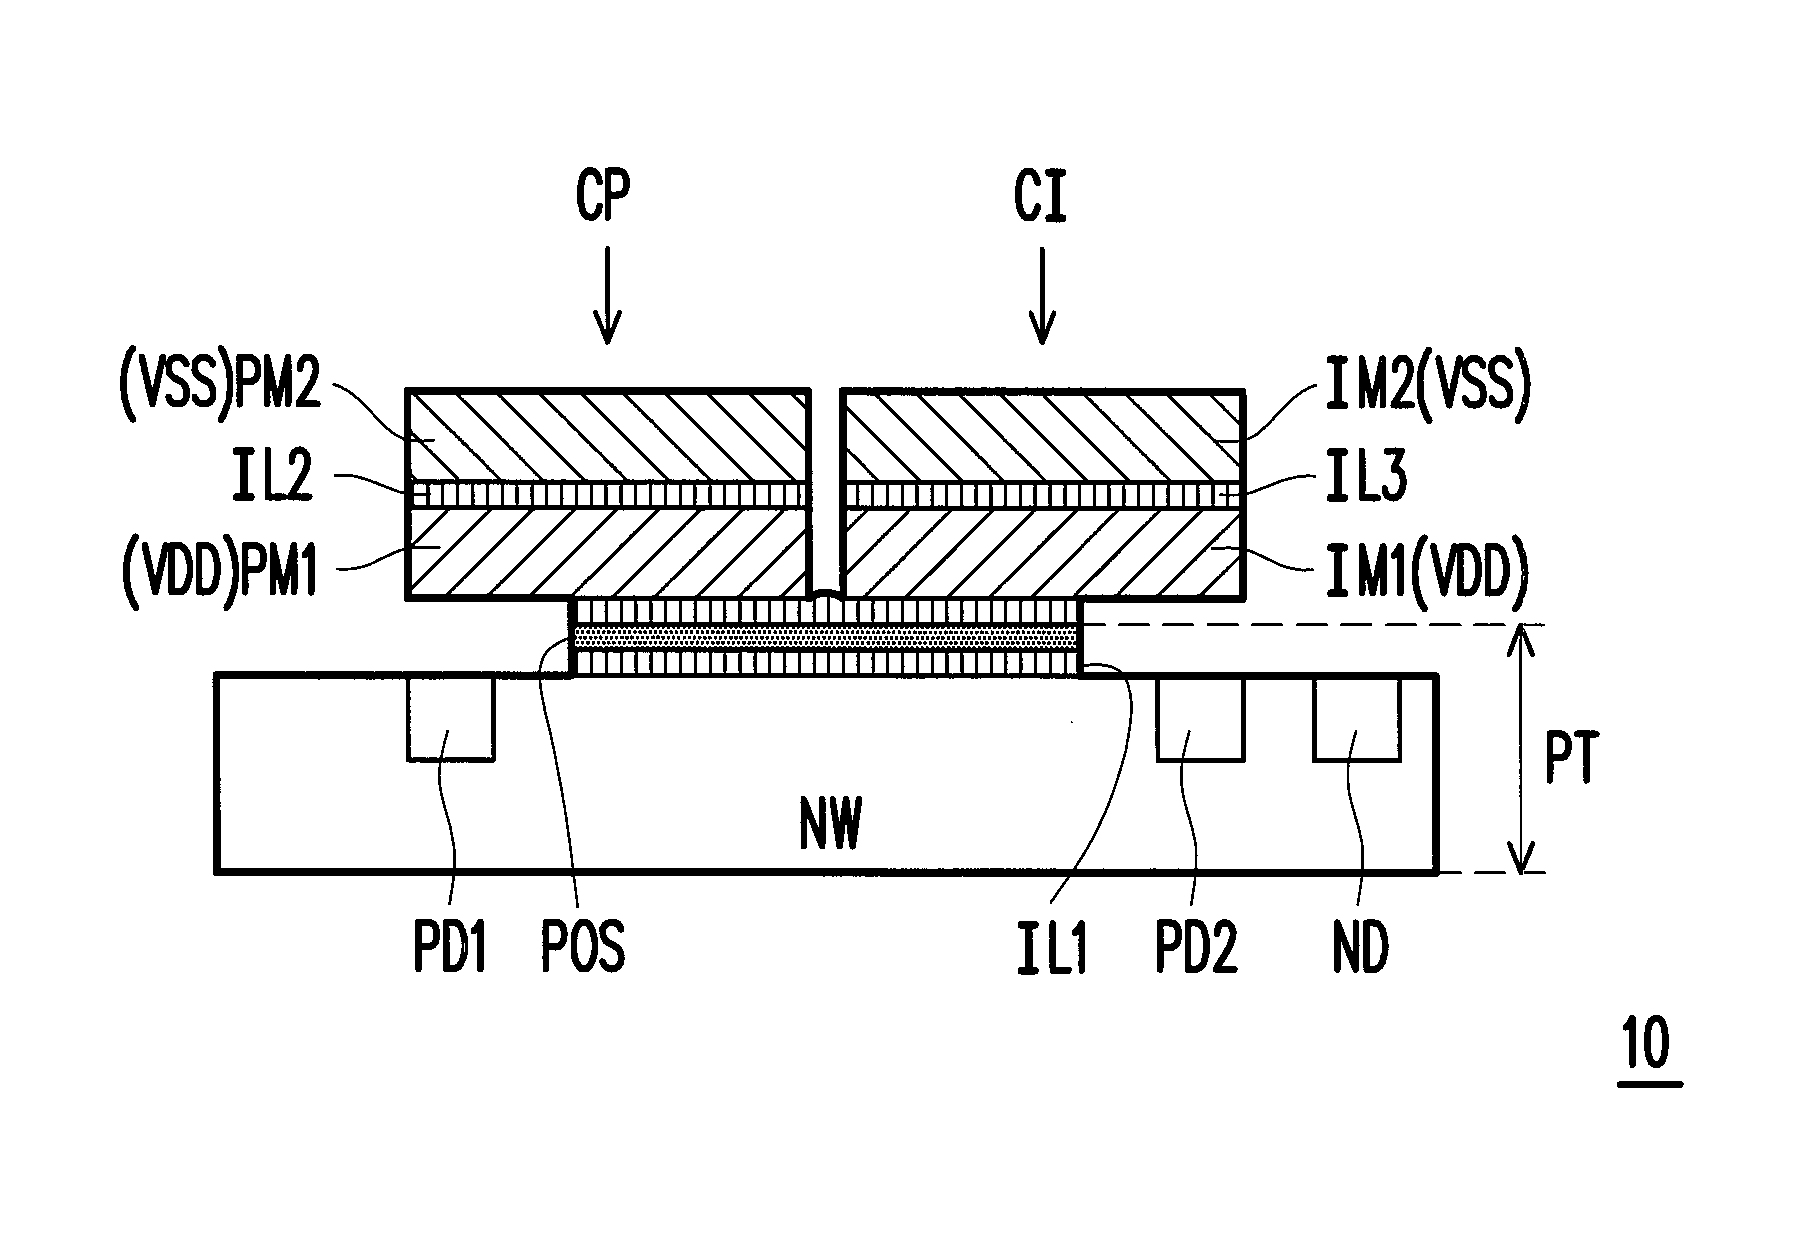 Capacitor structure applied to integrated circuit